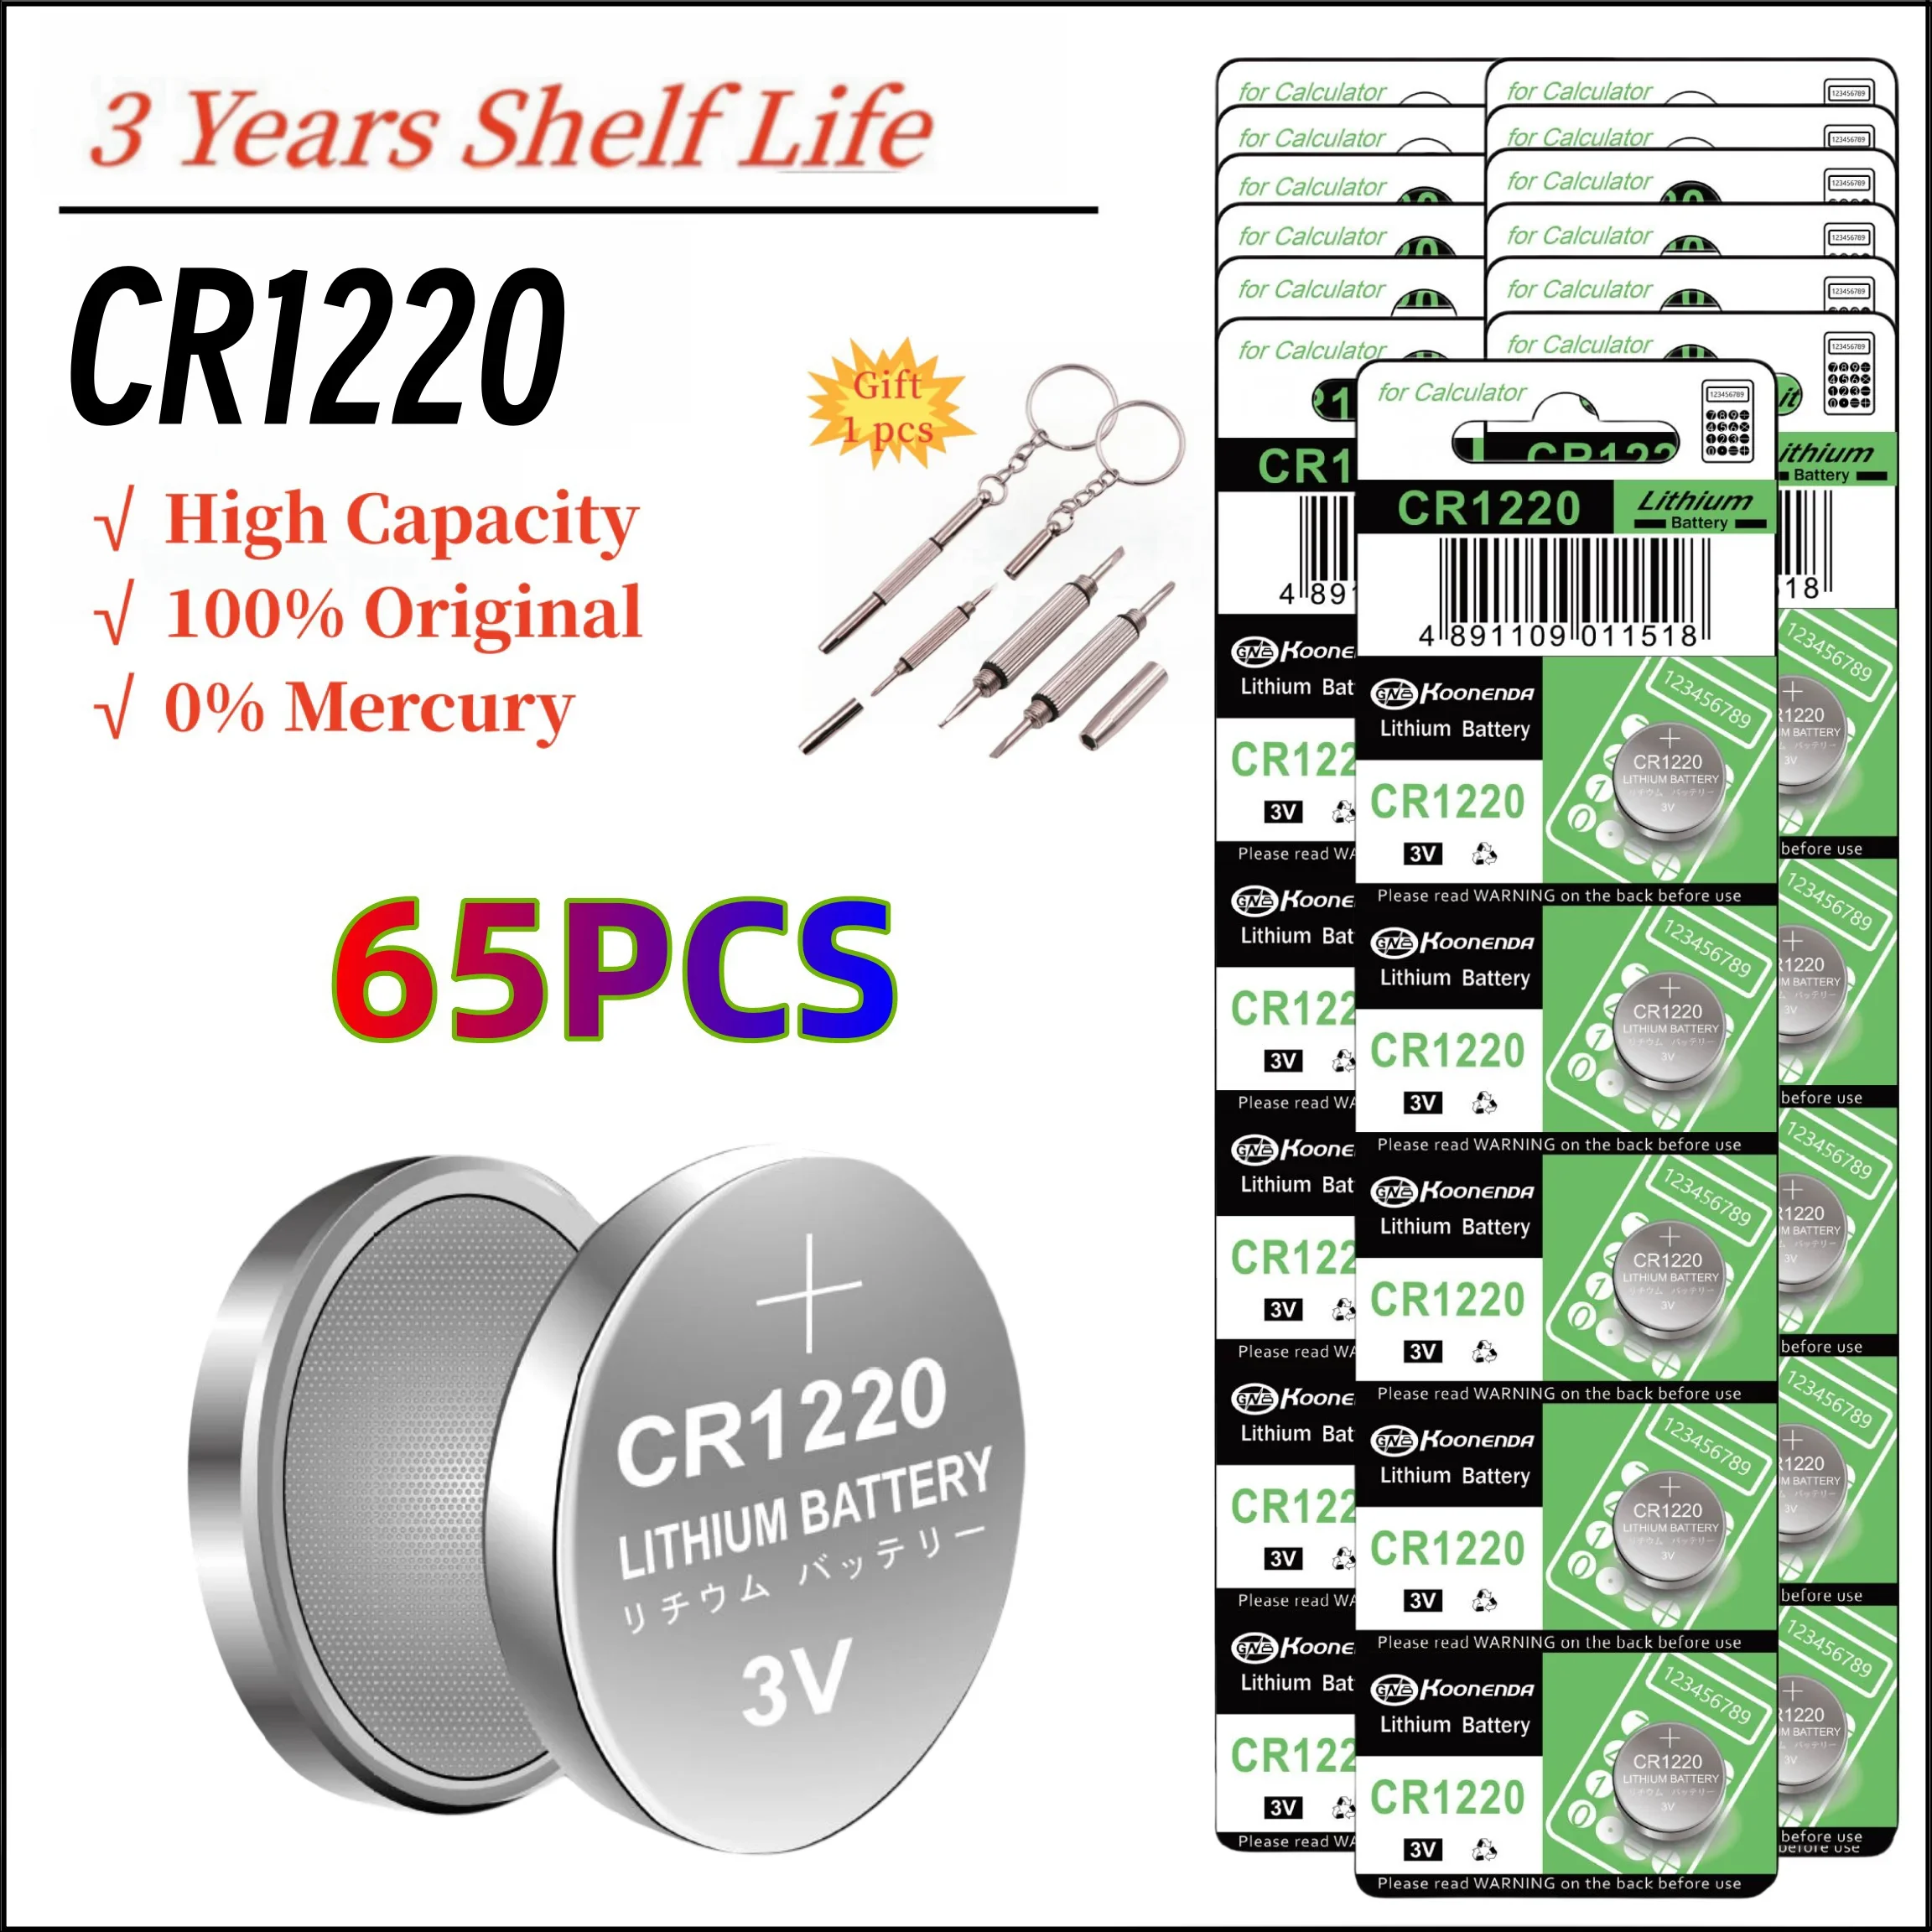 

5-65Pcs CR1220 Mercury free 3V Lithium Button Cell Battery A Long-lasting,Leak-free,Suitable for flashlights,car keys,watches